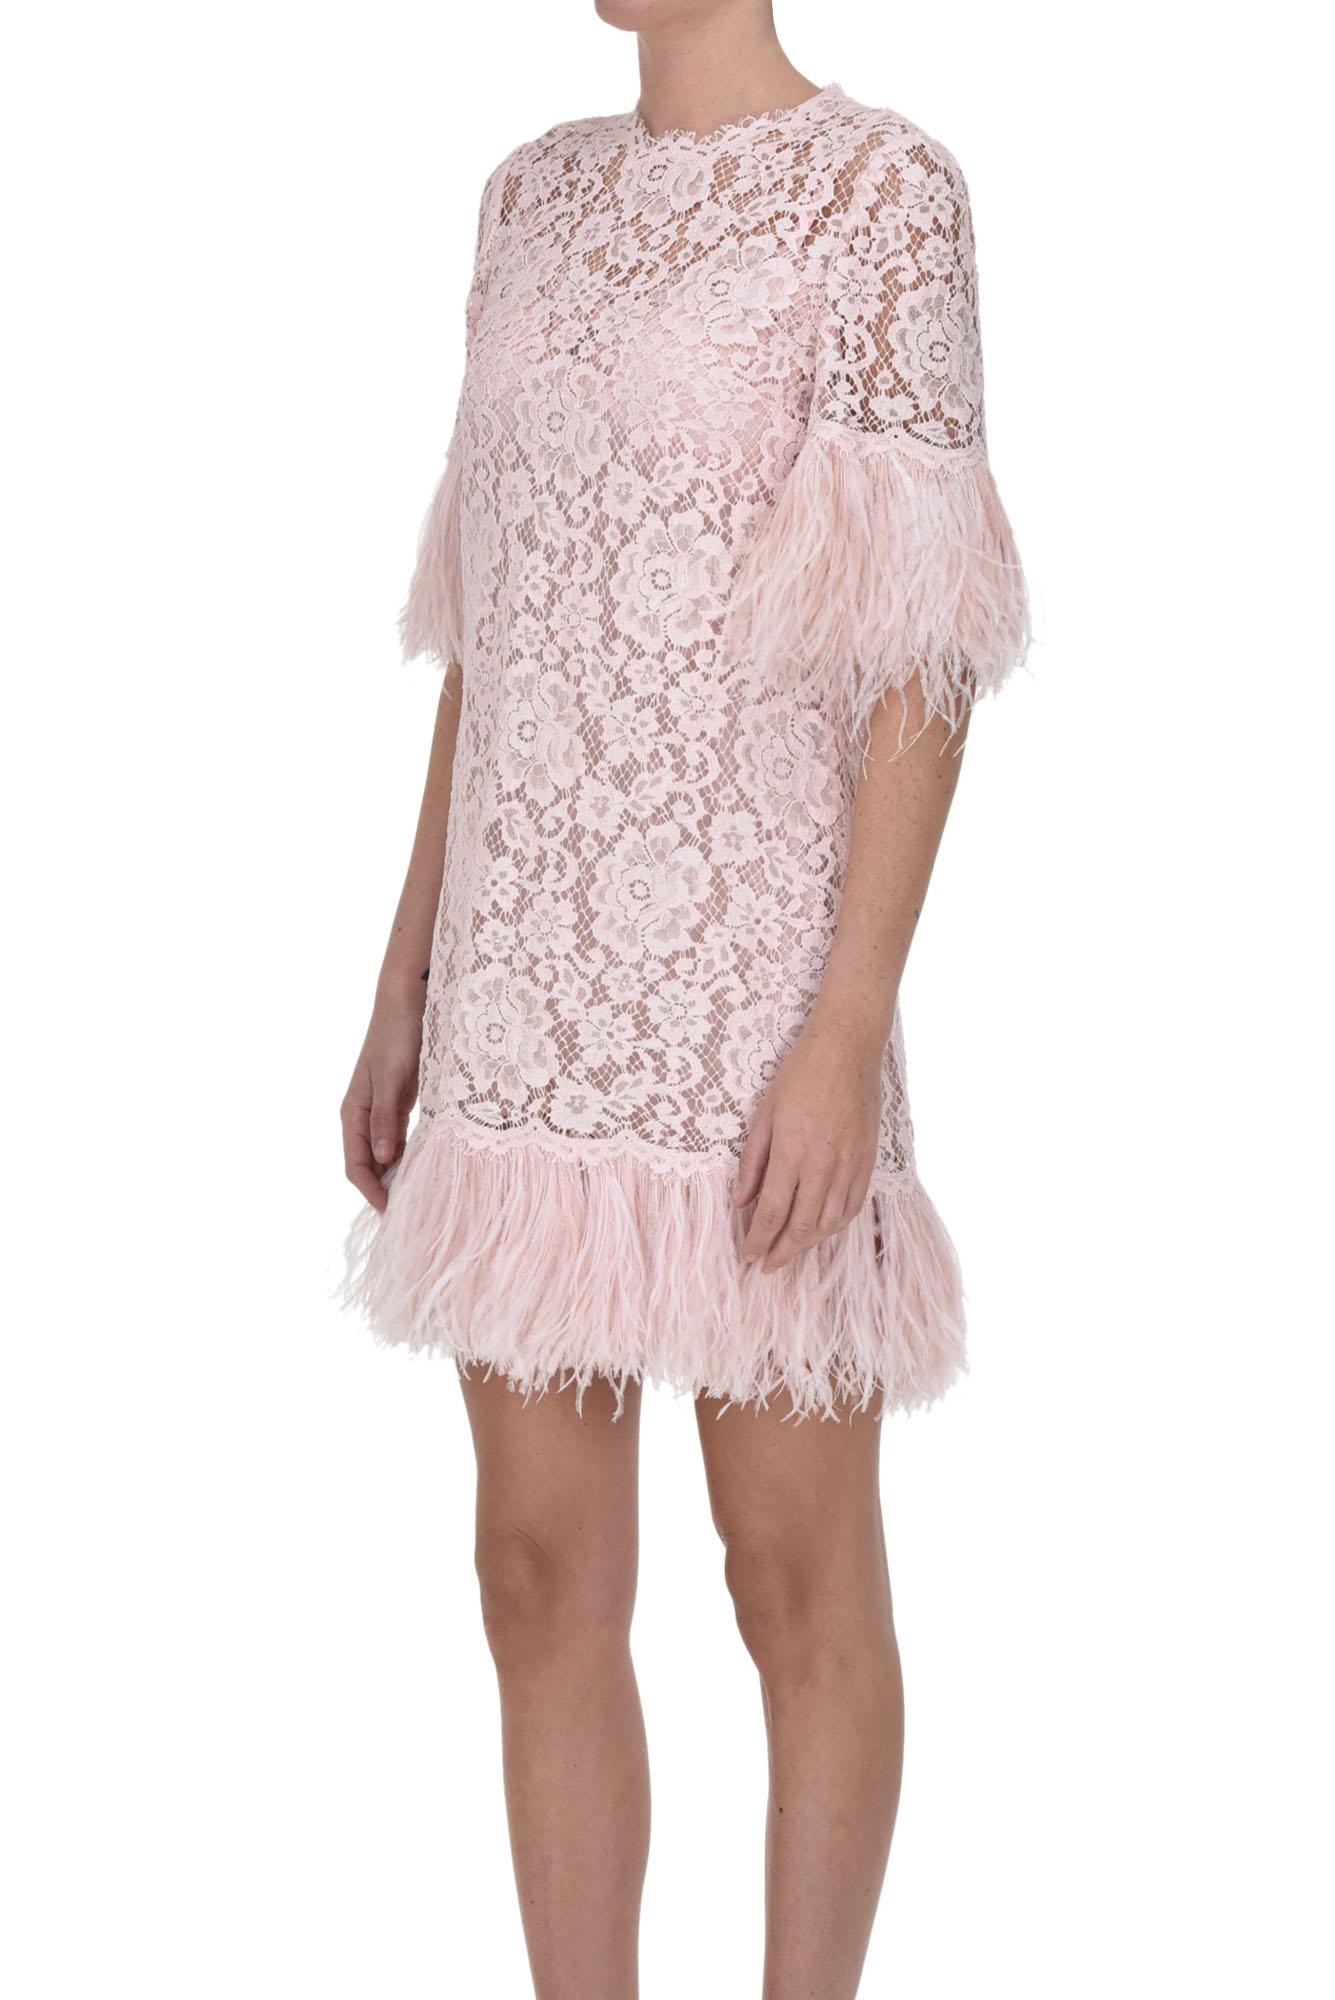 Dolce & Gabbana Feather Trimmed Lace Mini Dress in Pink | Lyst